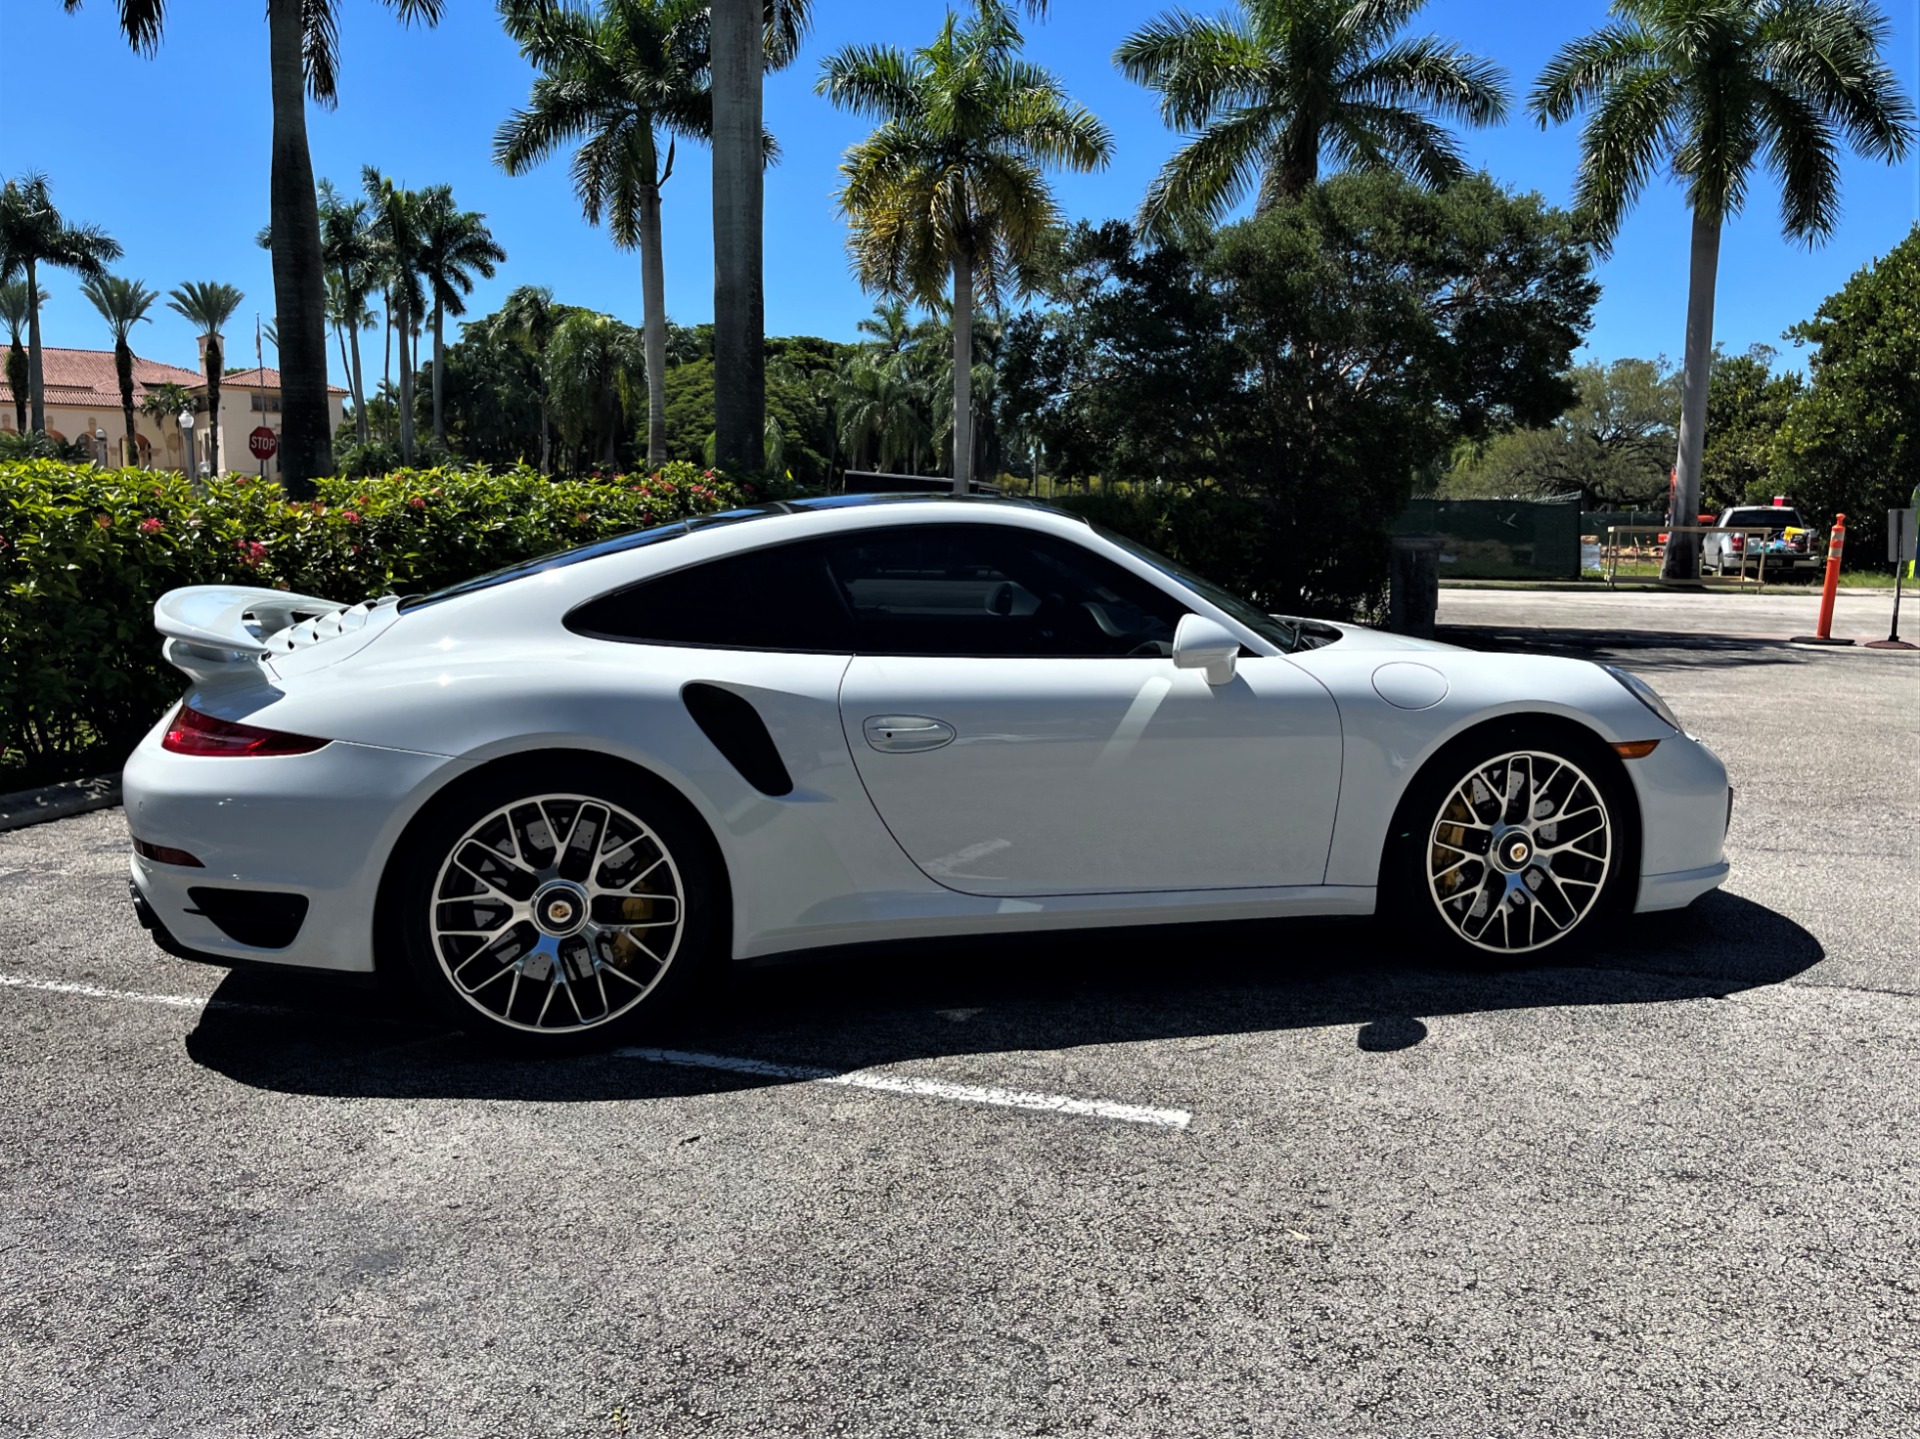 Used 2014 Porsche 911 Turbo S for sale $125,850 at The Gables Sports Cars in Miami FL 33146 4